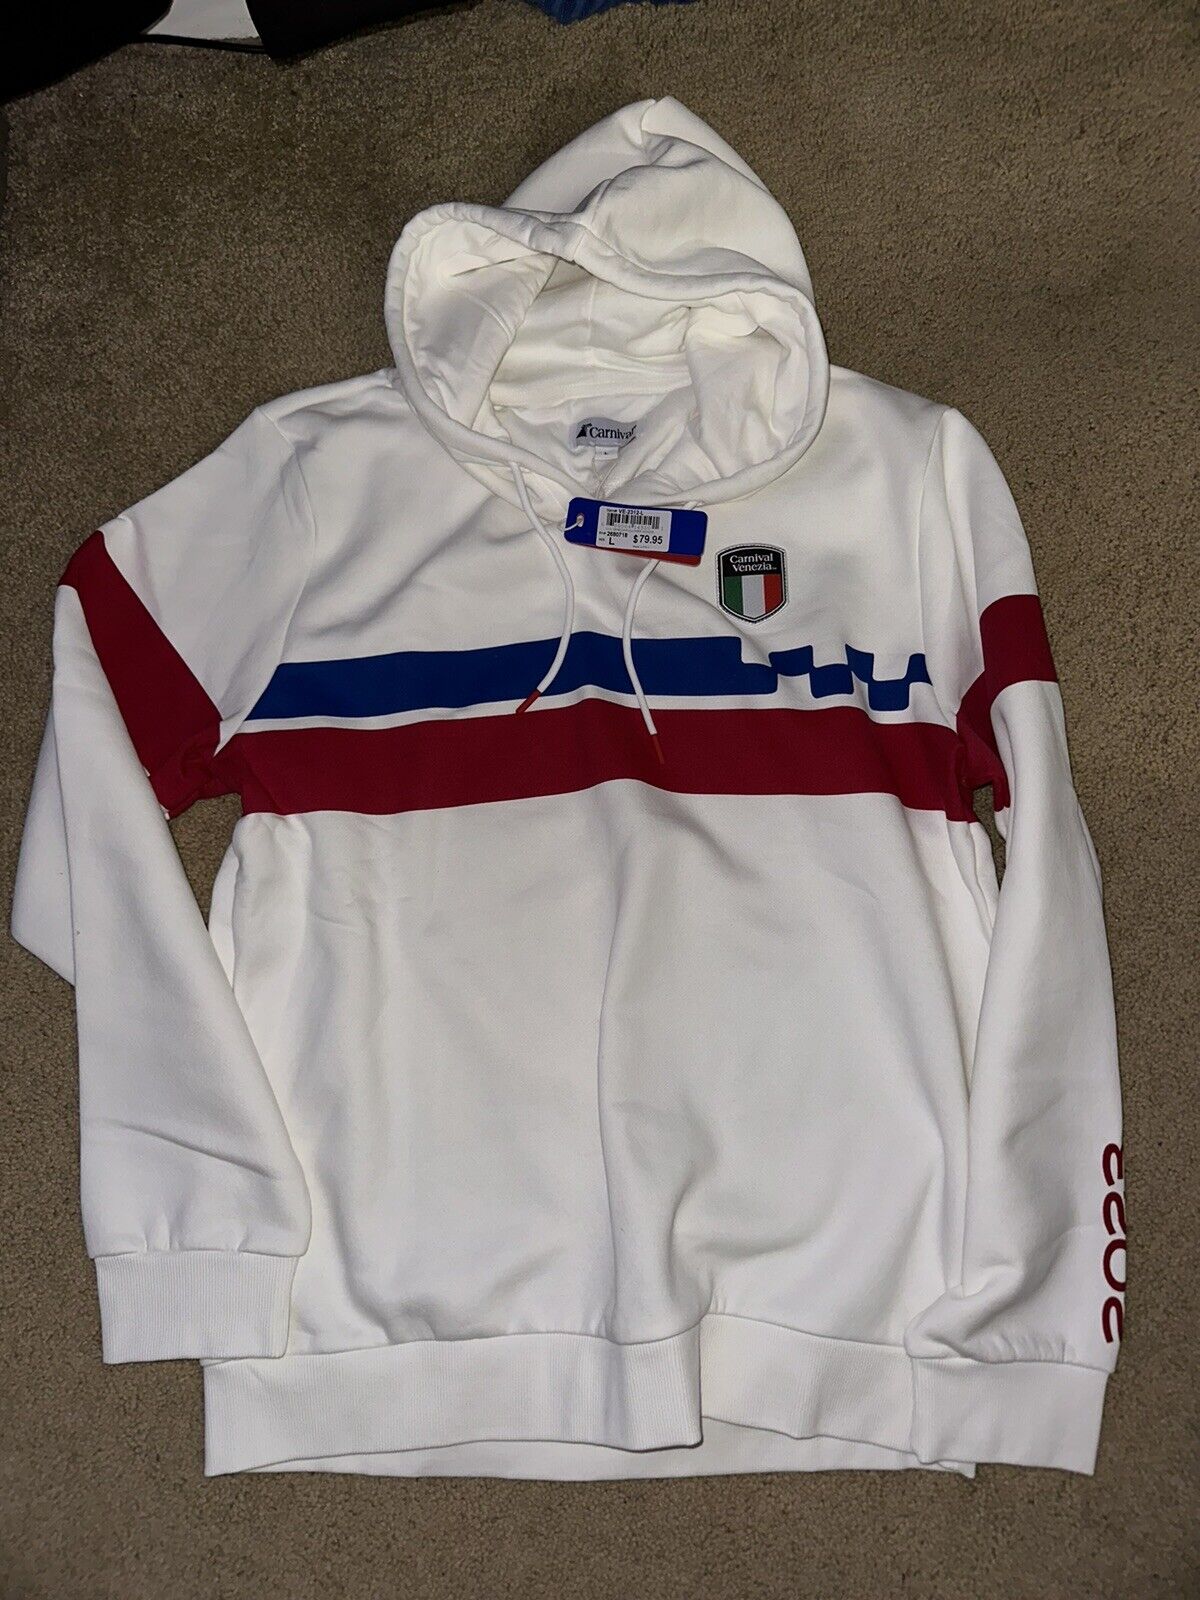 RARE NEW WITH TAGS CARNIVAL VENEZIA INAUGURAL HOODIE LARGE